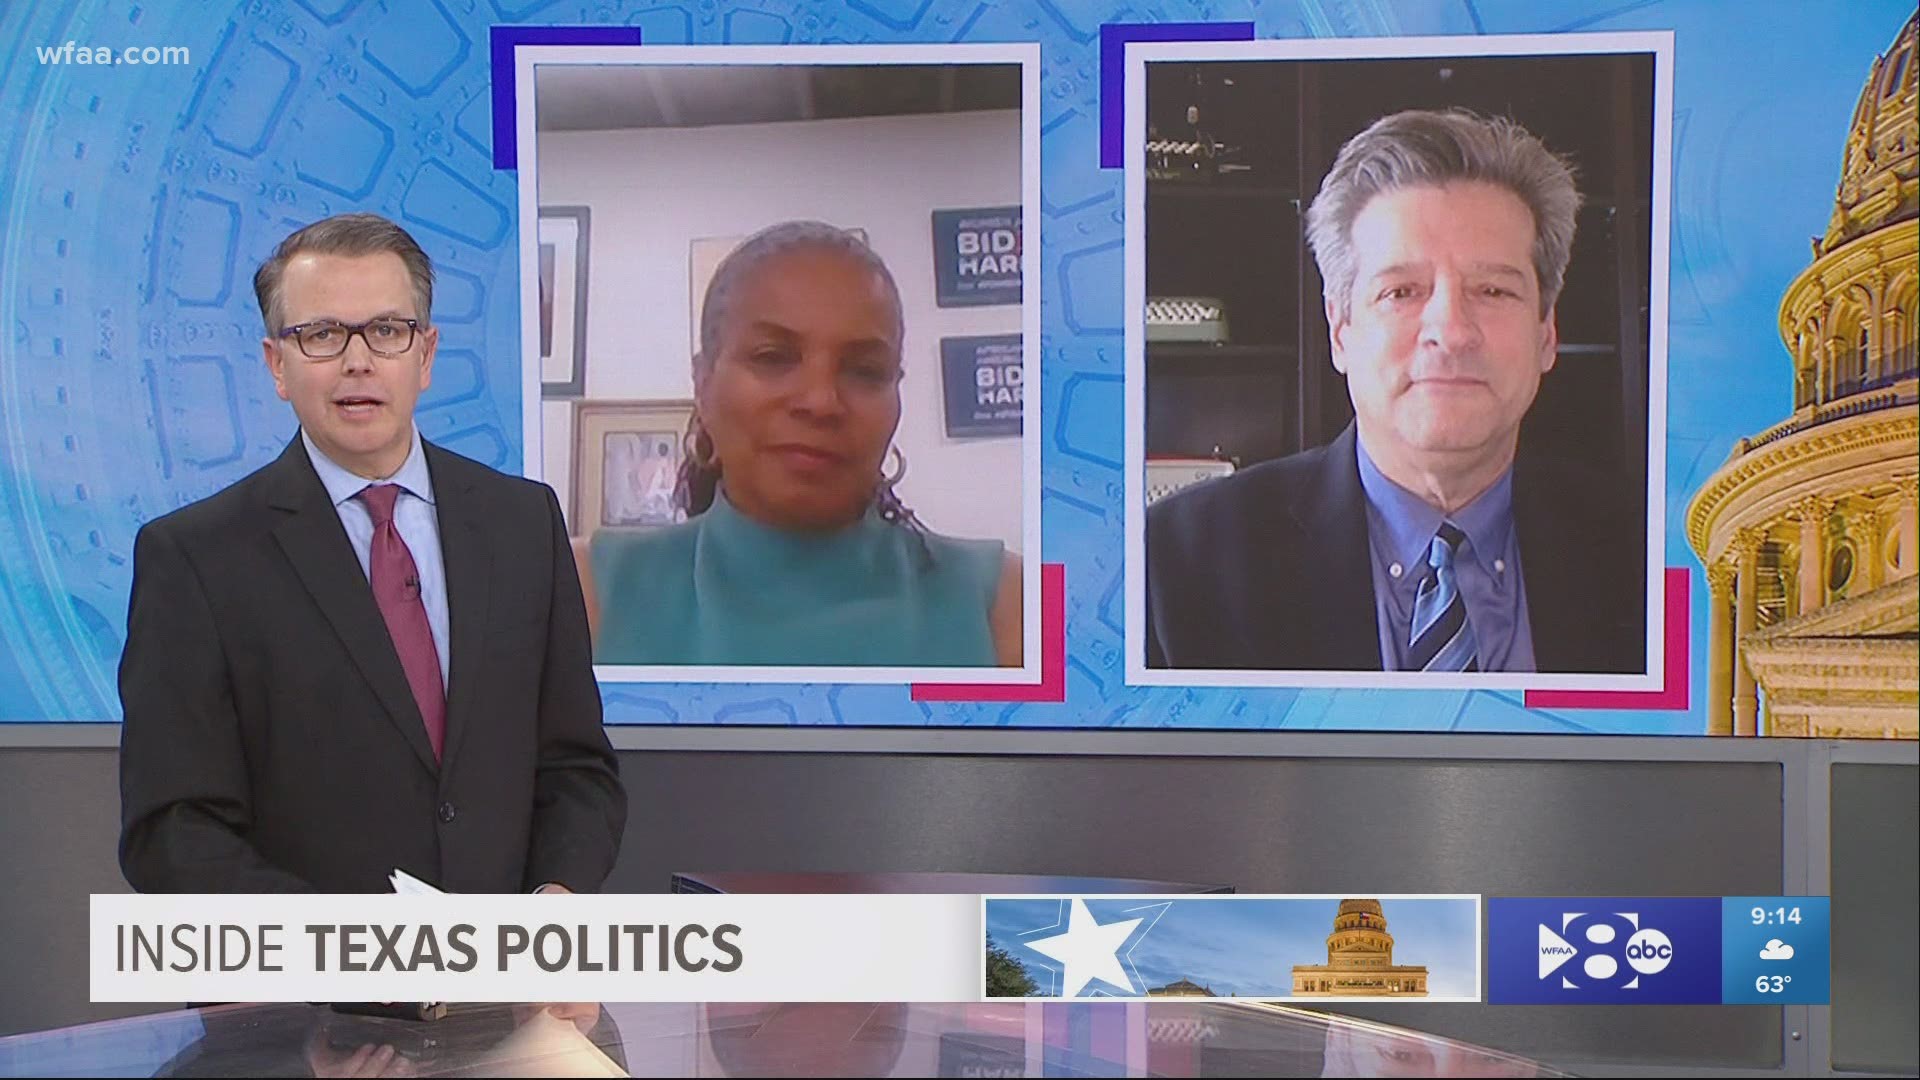 Deborah Peoples with the Tarrant County Democratic Party and Vinny Minchillo, a Republican ad campaign specialist, explain what happened.